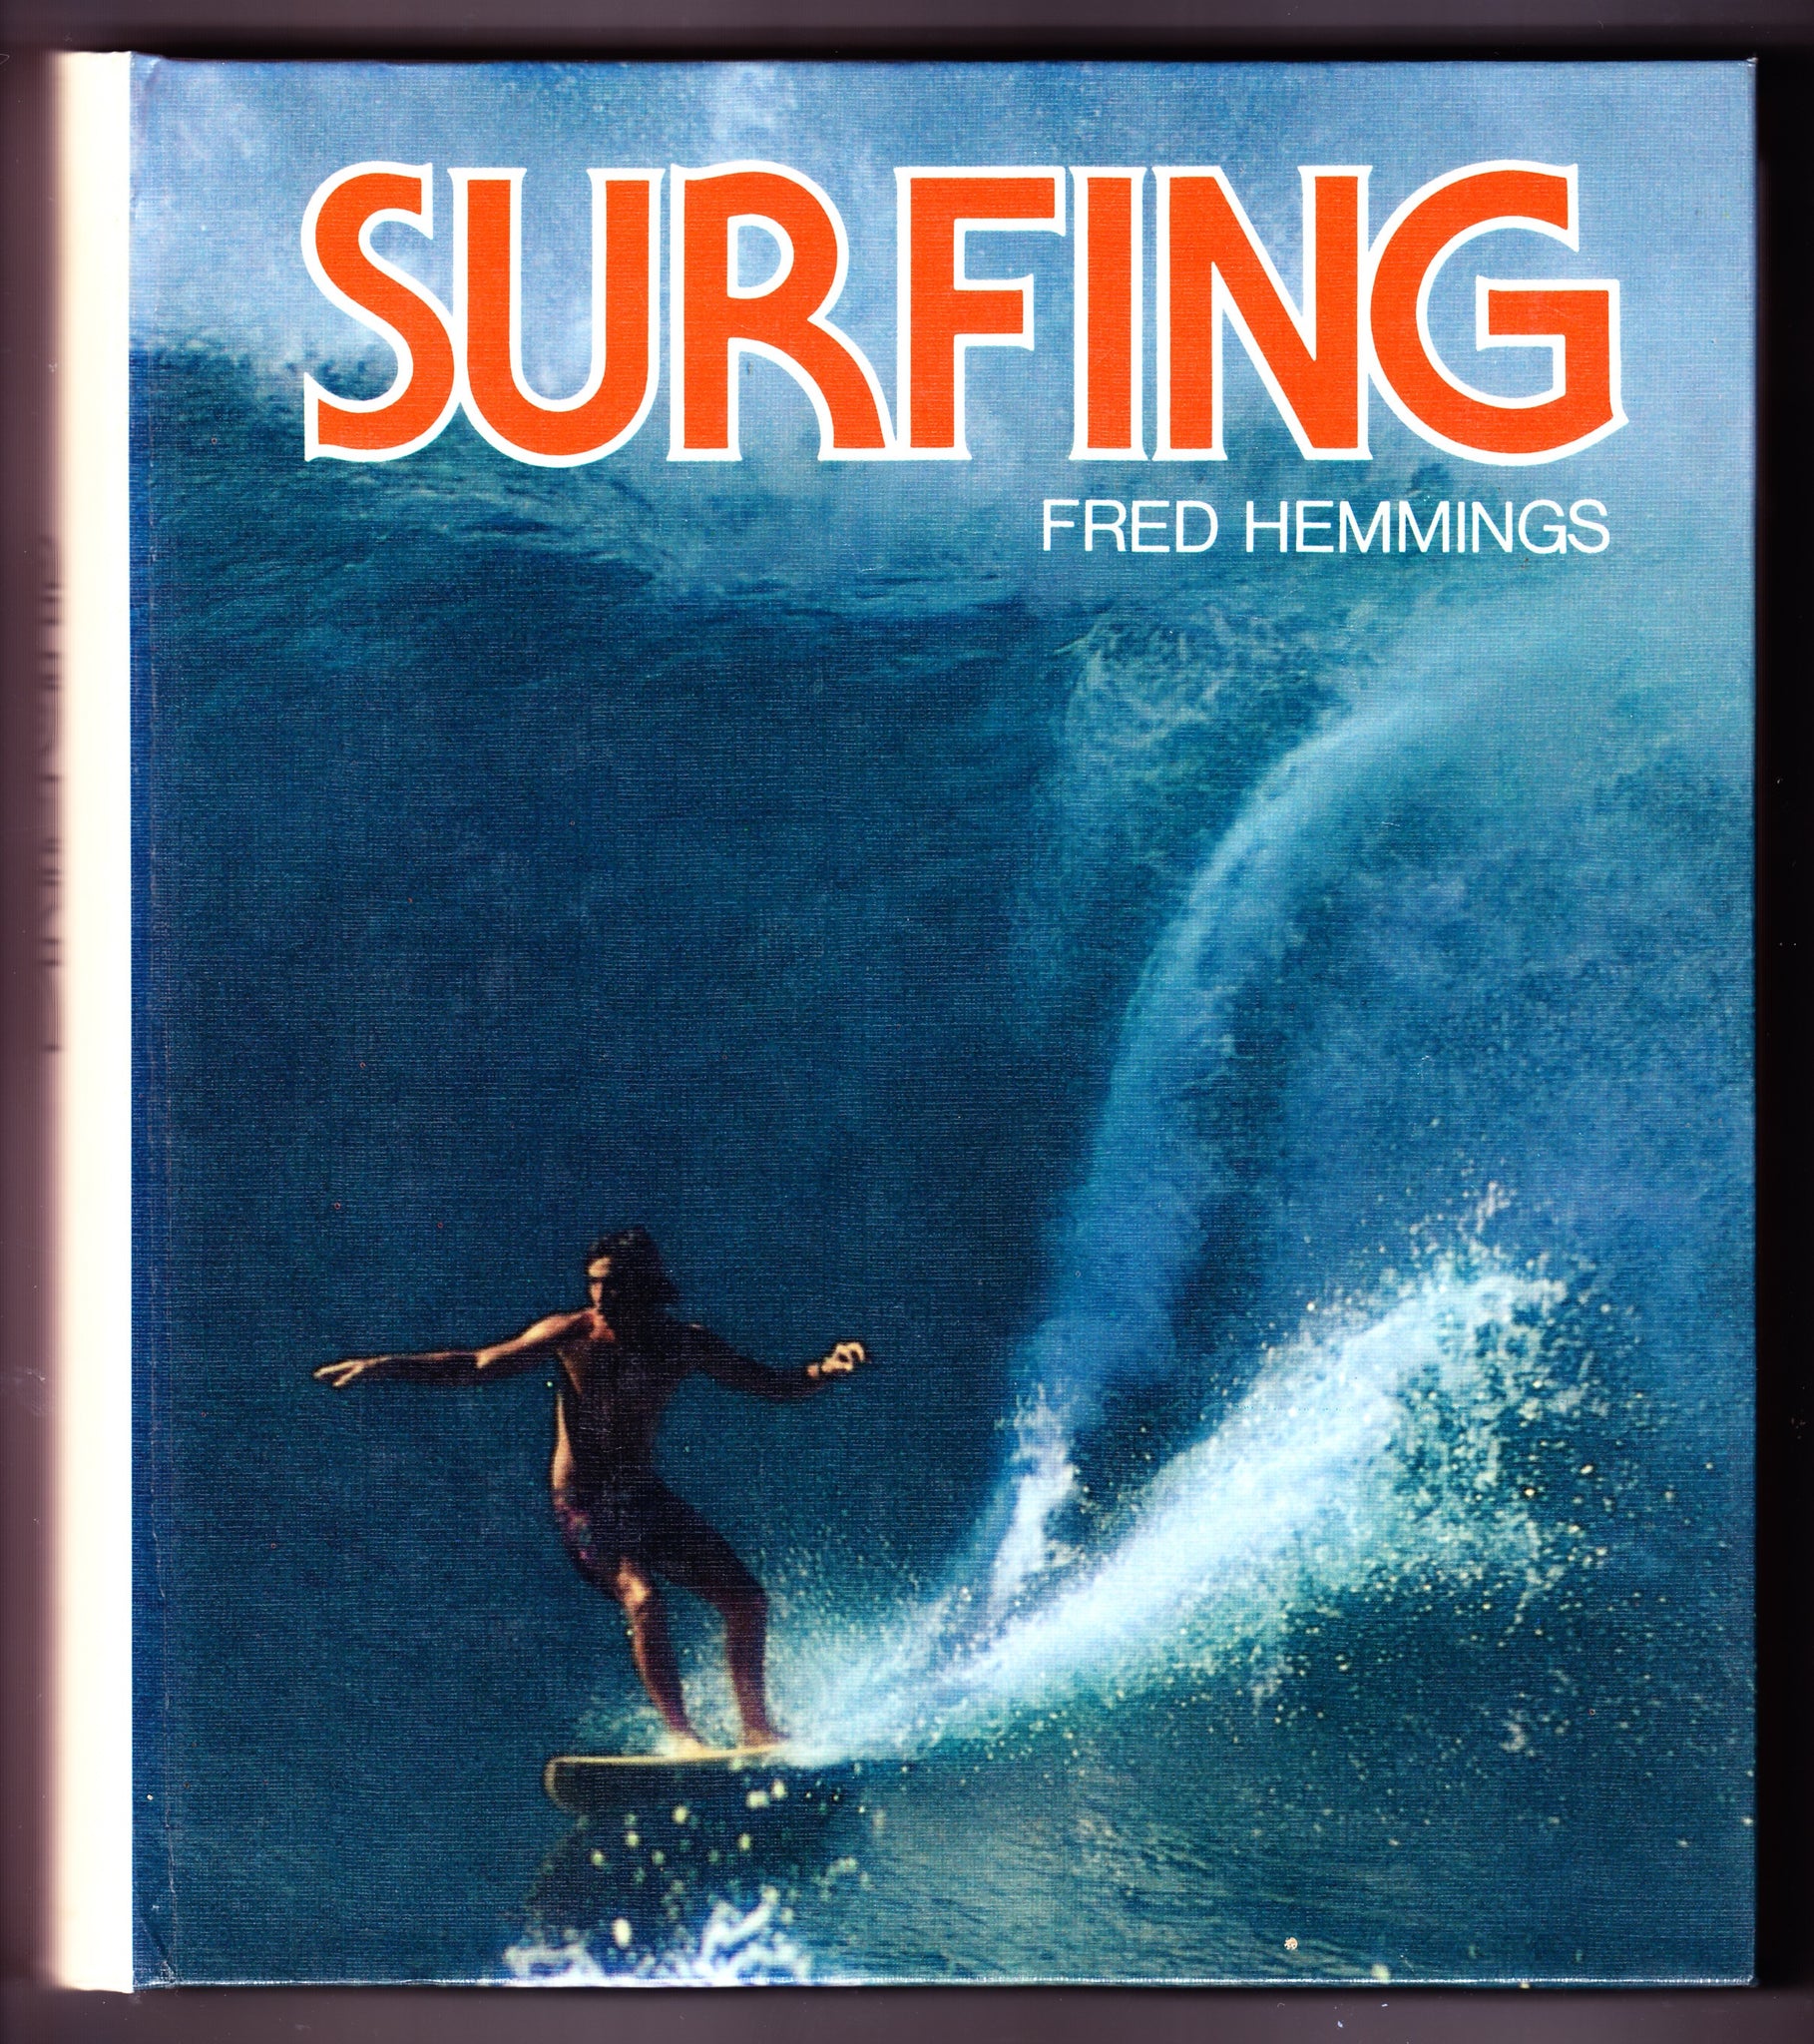 'Surfing' by Fred Hemmings.